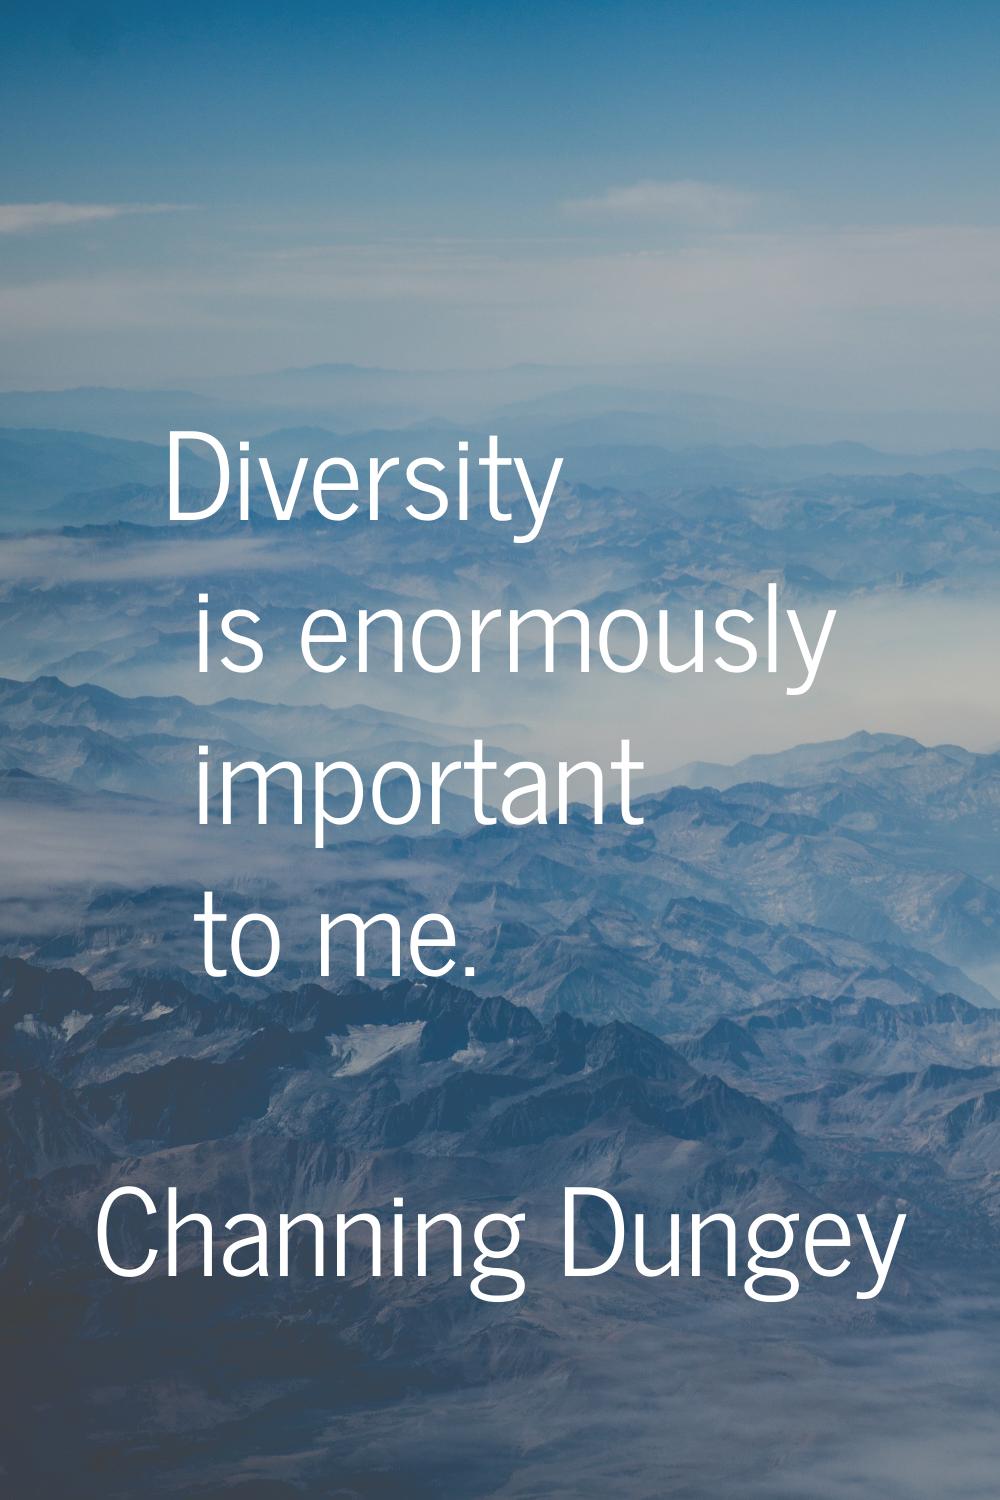 Diversity is enormously important to me.